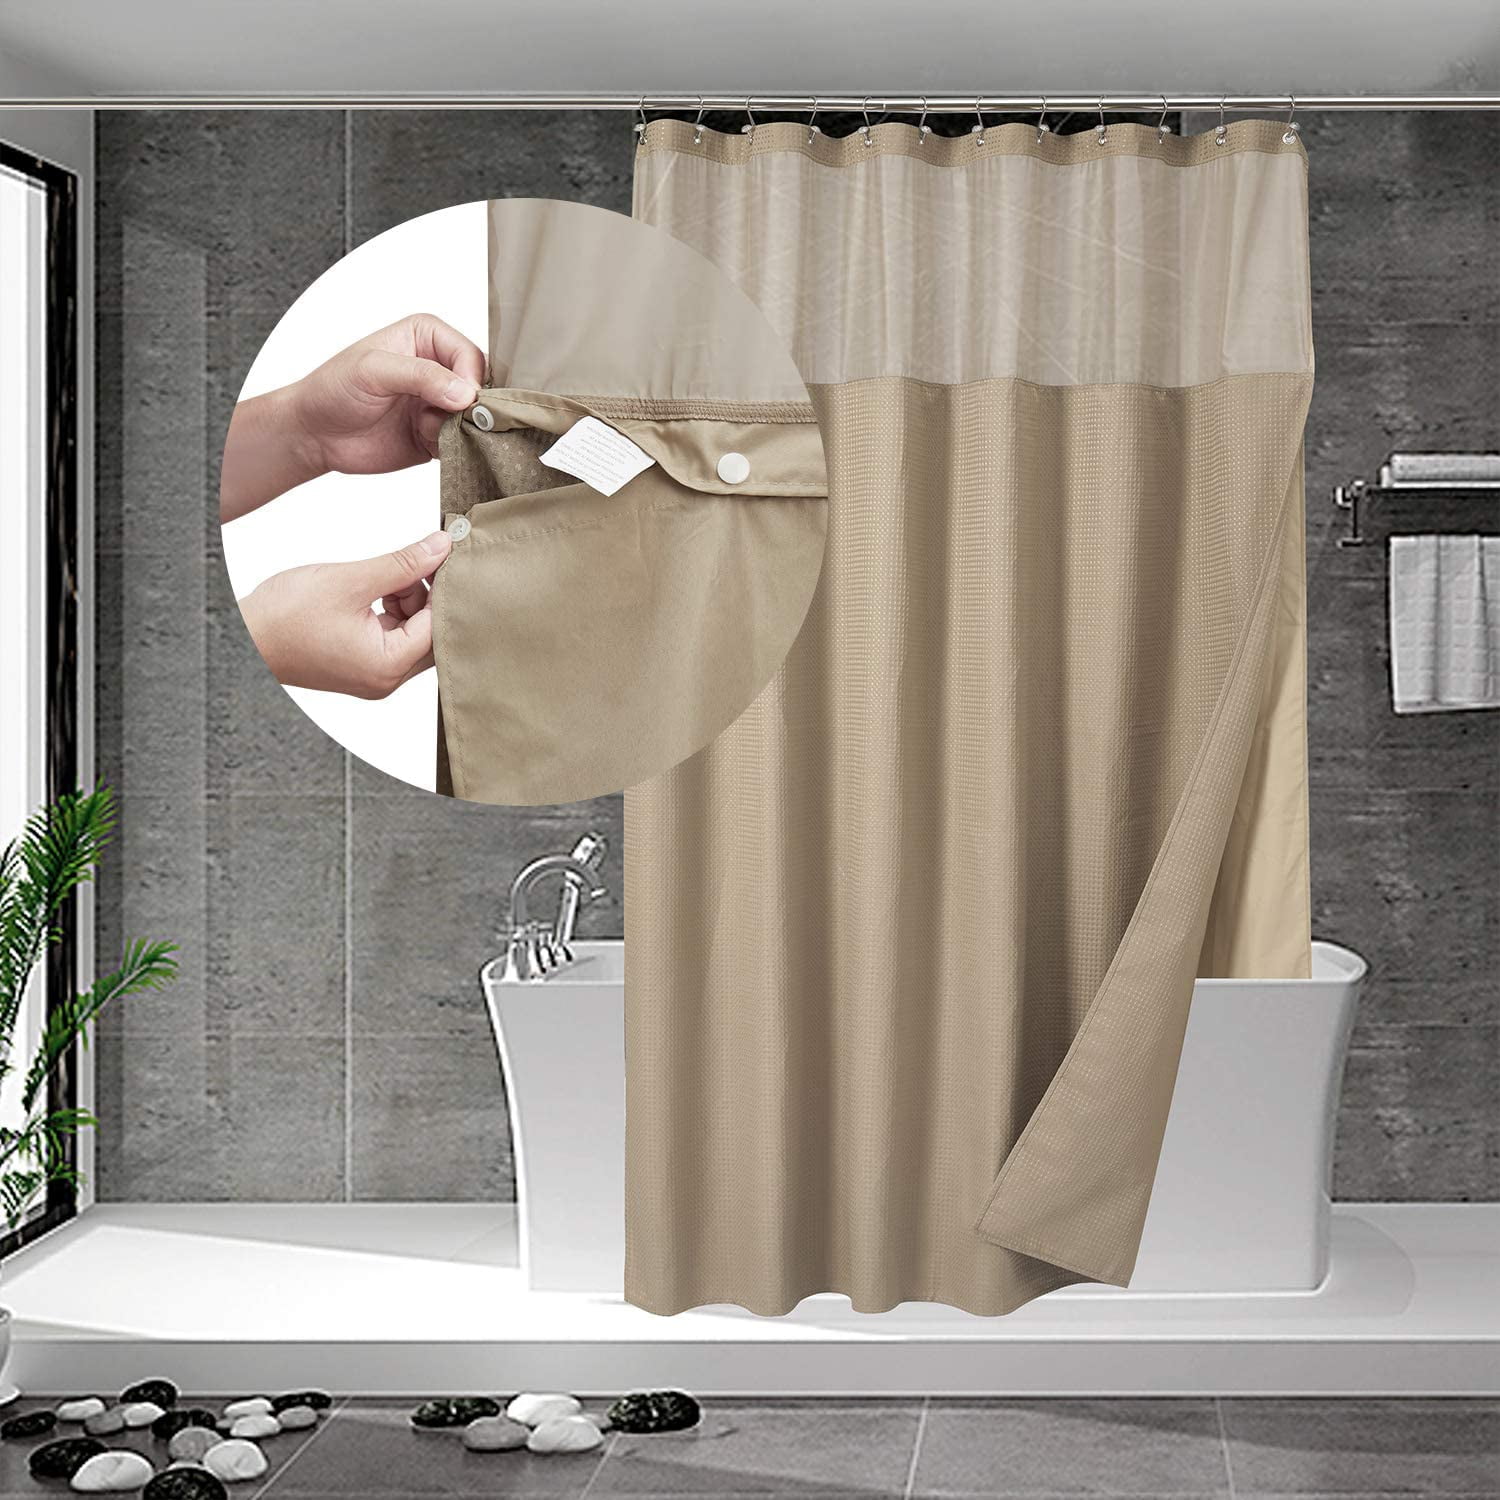 NEW Hookless Shower Curtain w/ Snap-In Liner Brown with Cream & Mesh Panel 